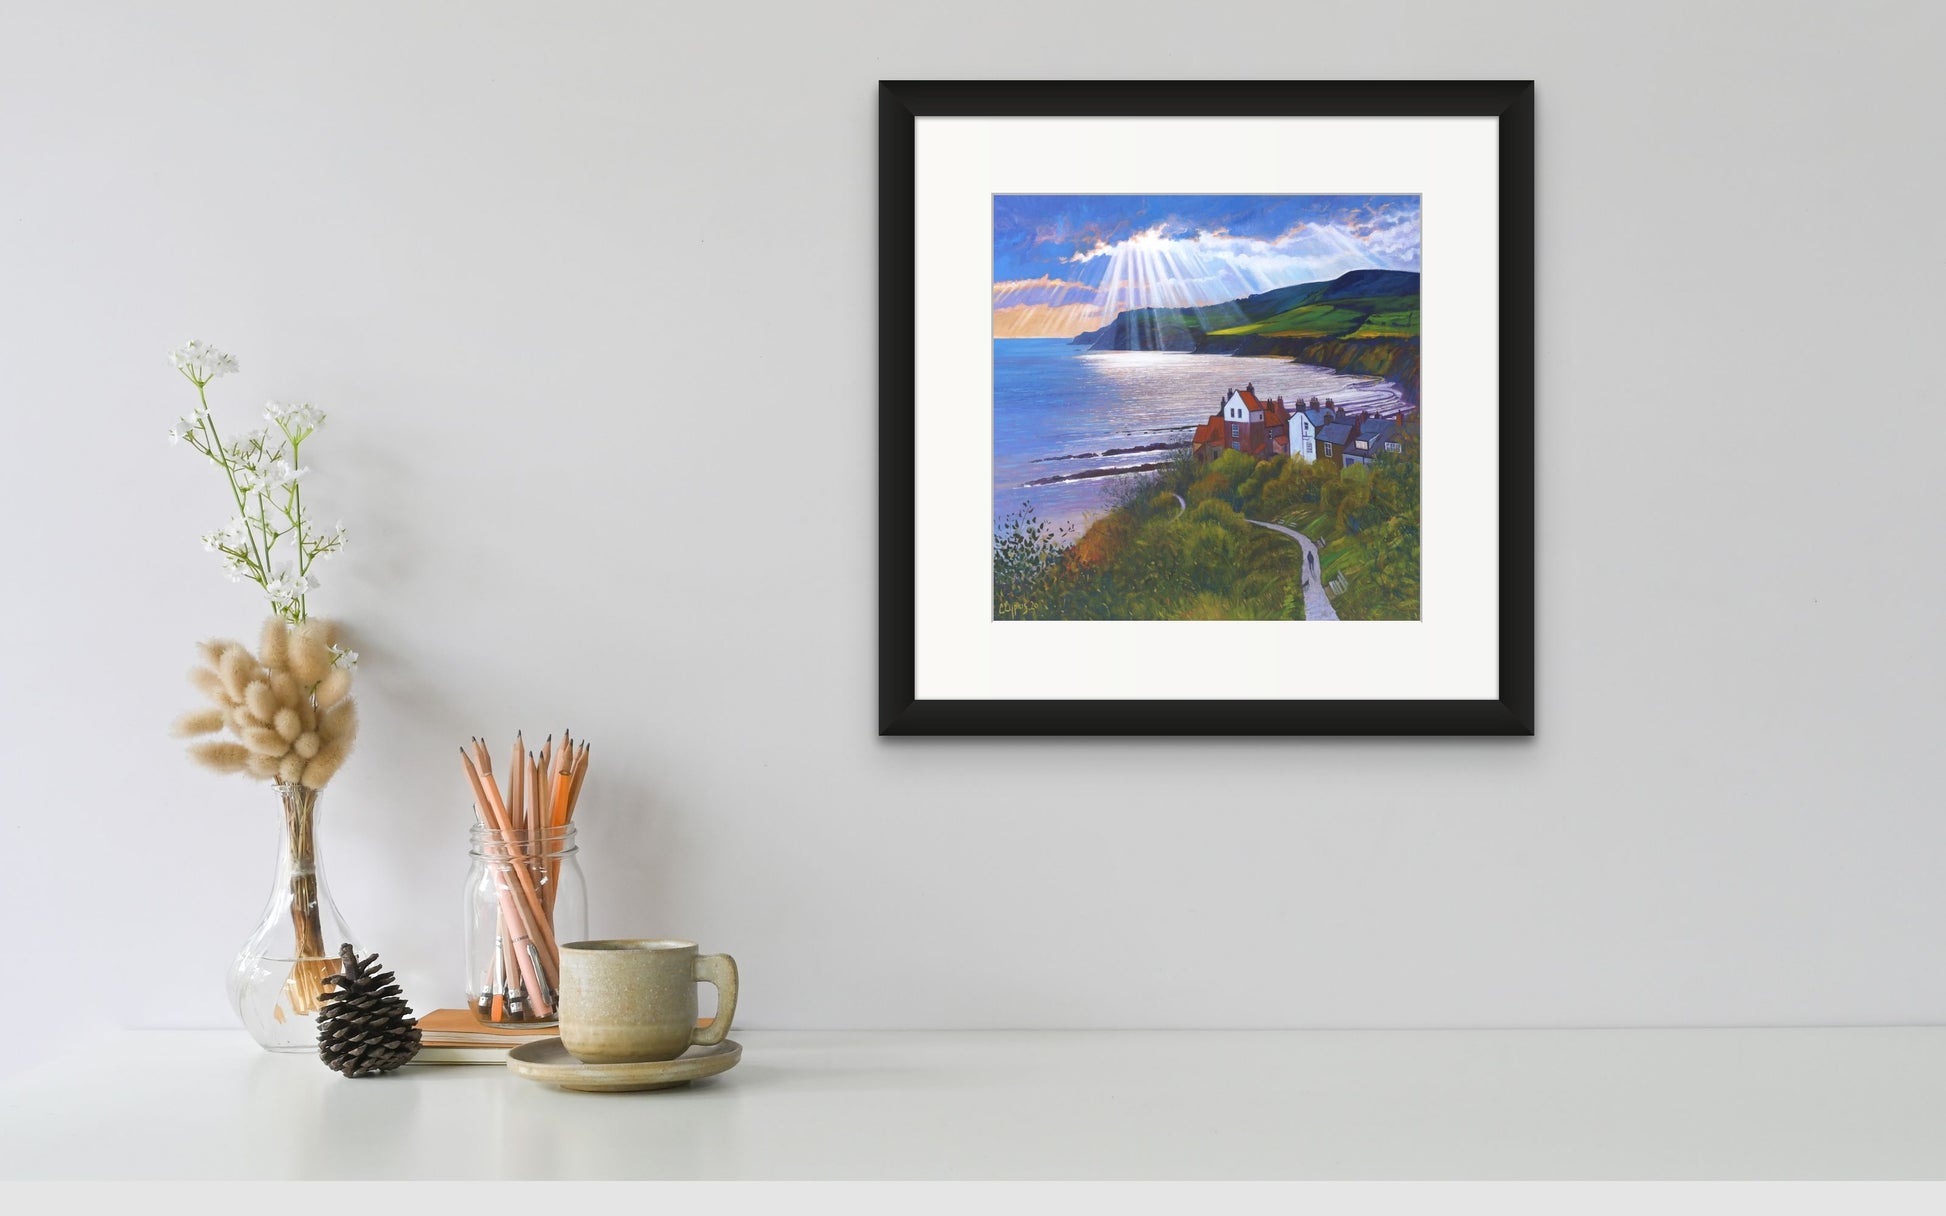 Reproduced from the original oil painting completed in 2020.  The scene features the famous headland view over the stunning Robin Hoods Bay, Northeast Coast UK.   Actual size of artwork  40cm x 40cm       Signed and embossed     Unique certificate of authentication     Limited run of 50     Printed on 300gsm archival quality paper using lightfast inks     Tube rolled for worldwide shipping  . The image shows the print framed and displayed